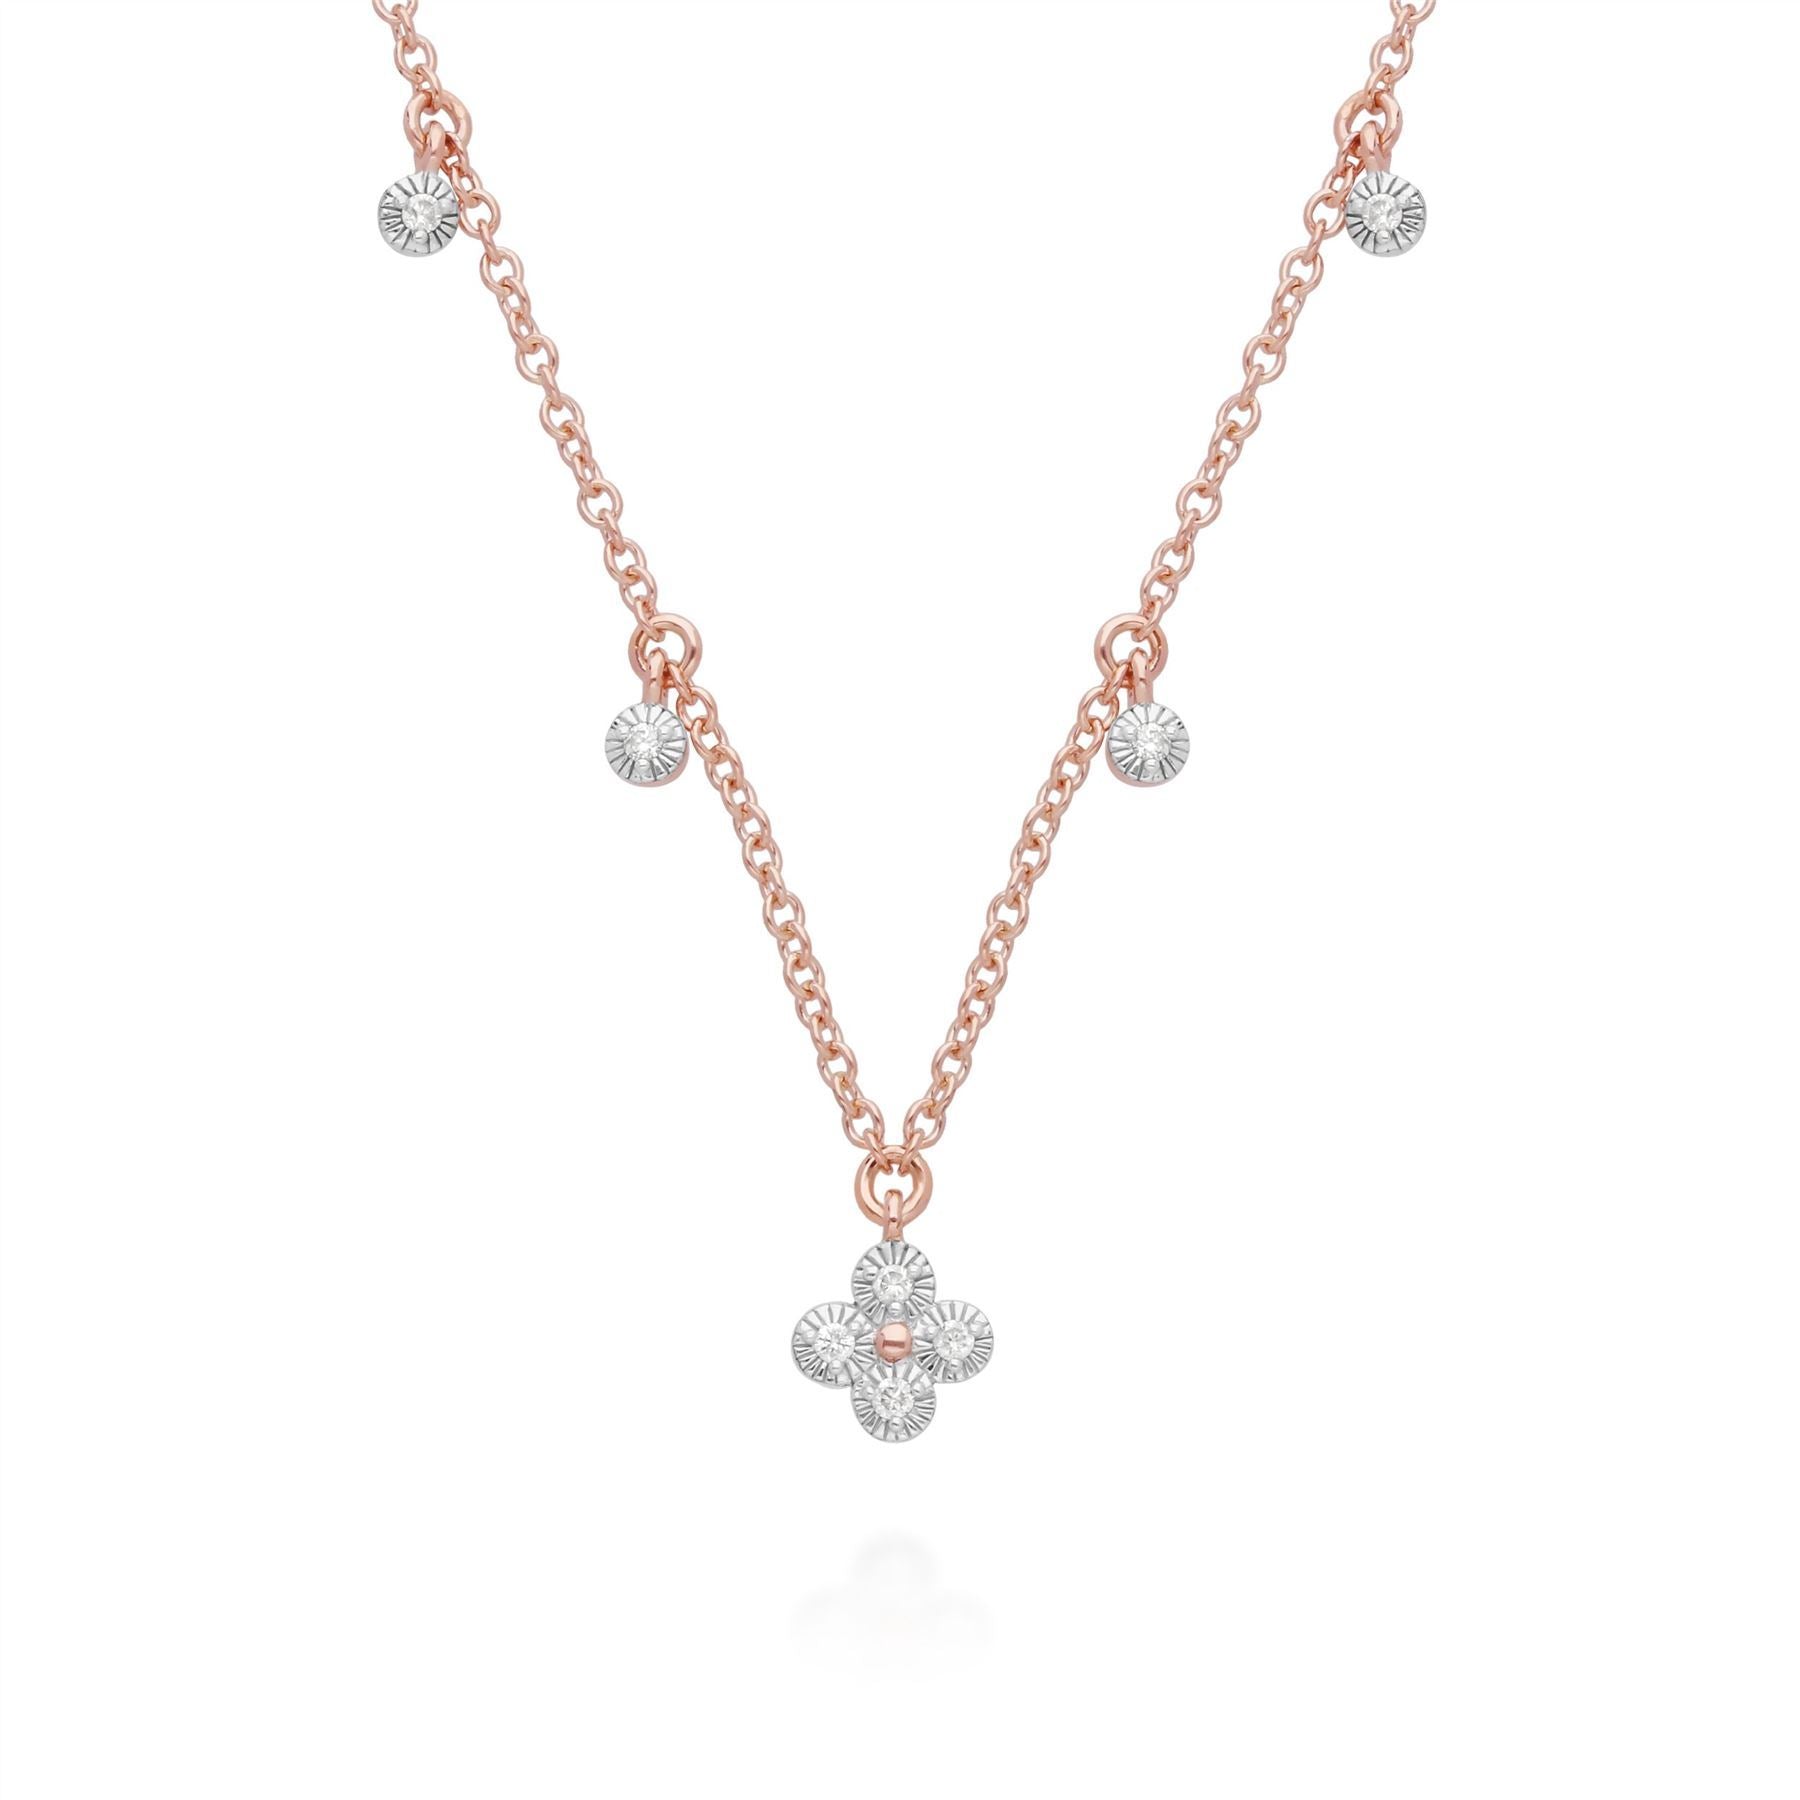 Diamond Flowers Choker Charm Necklace in 9ct Rose Gold